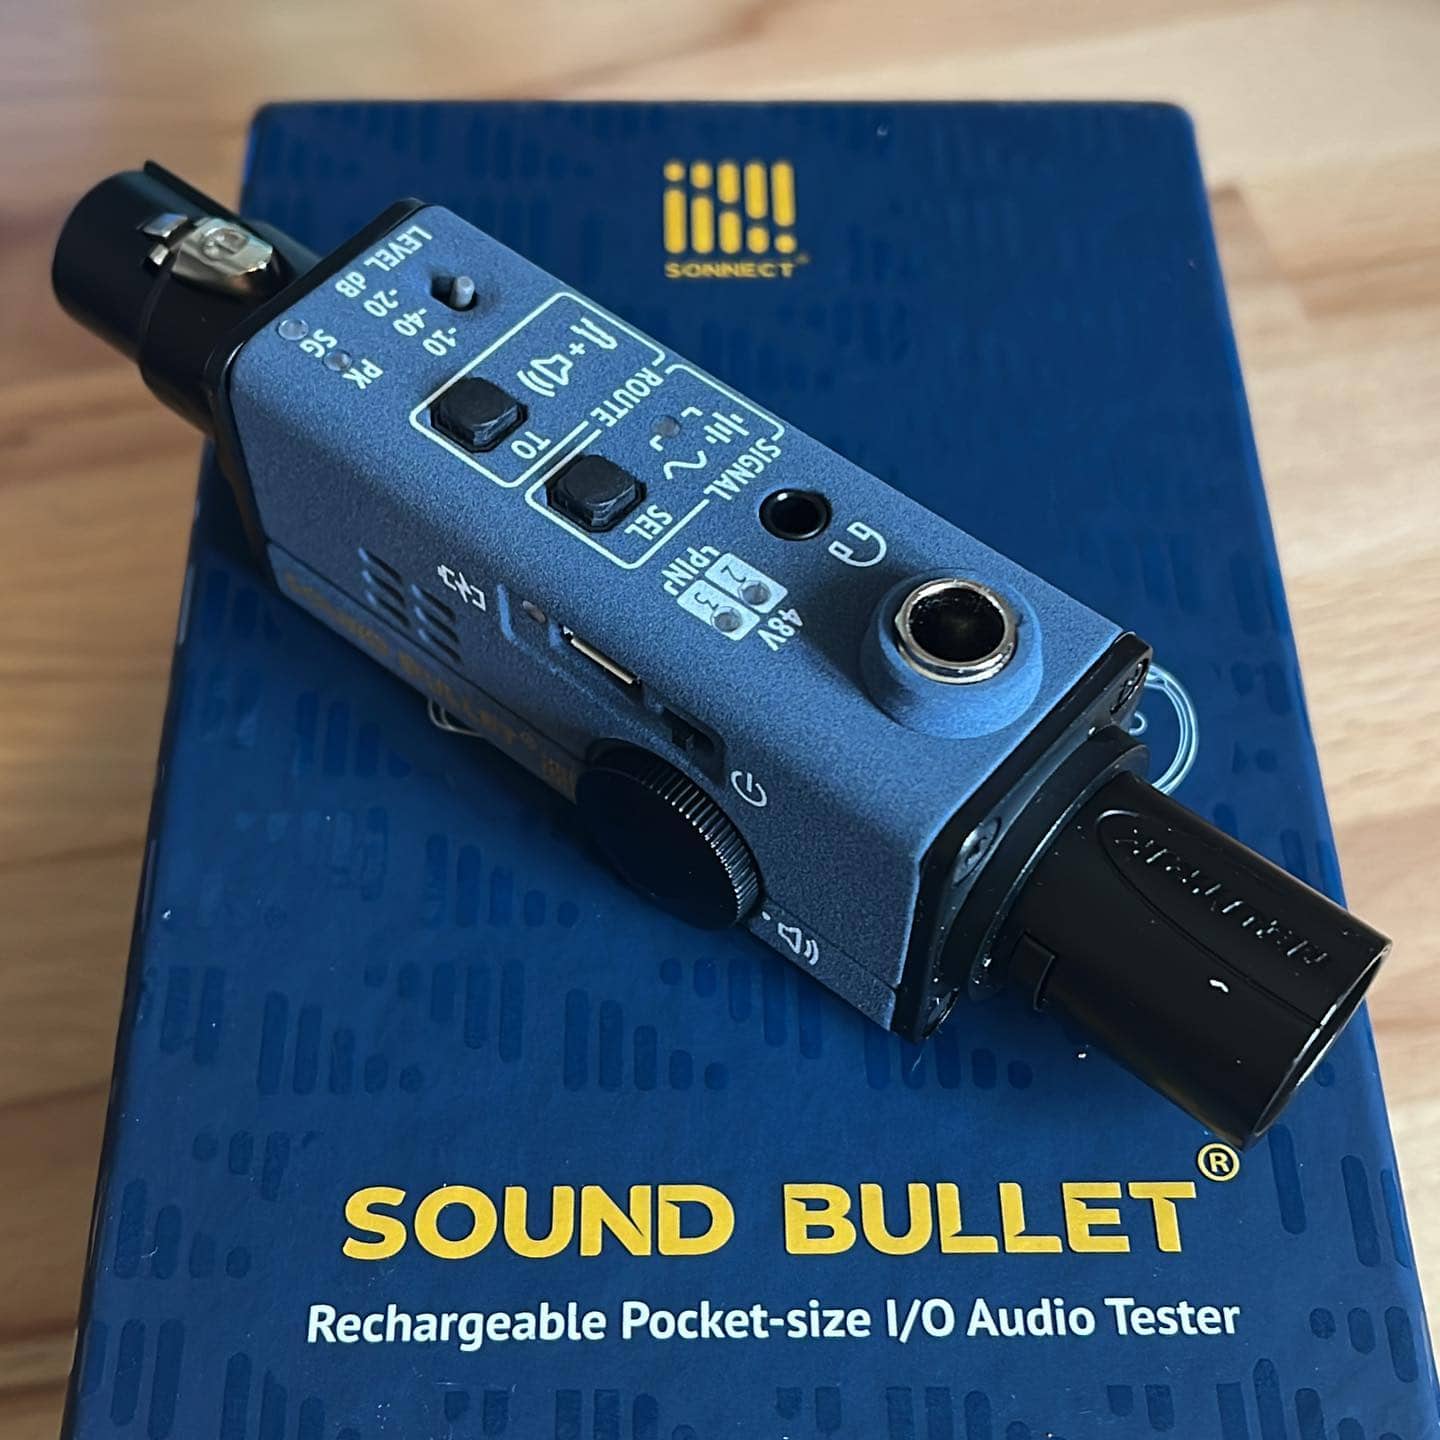 Our newest piece of onstage test equipment just arrived, and ooh-la-la!!

This thing is built tough, which is great, because we suspect it’s going to get a whole lotta use.

@sonnectaudio